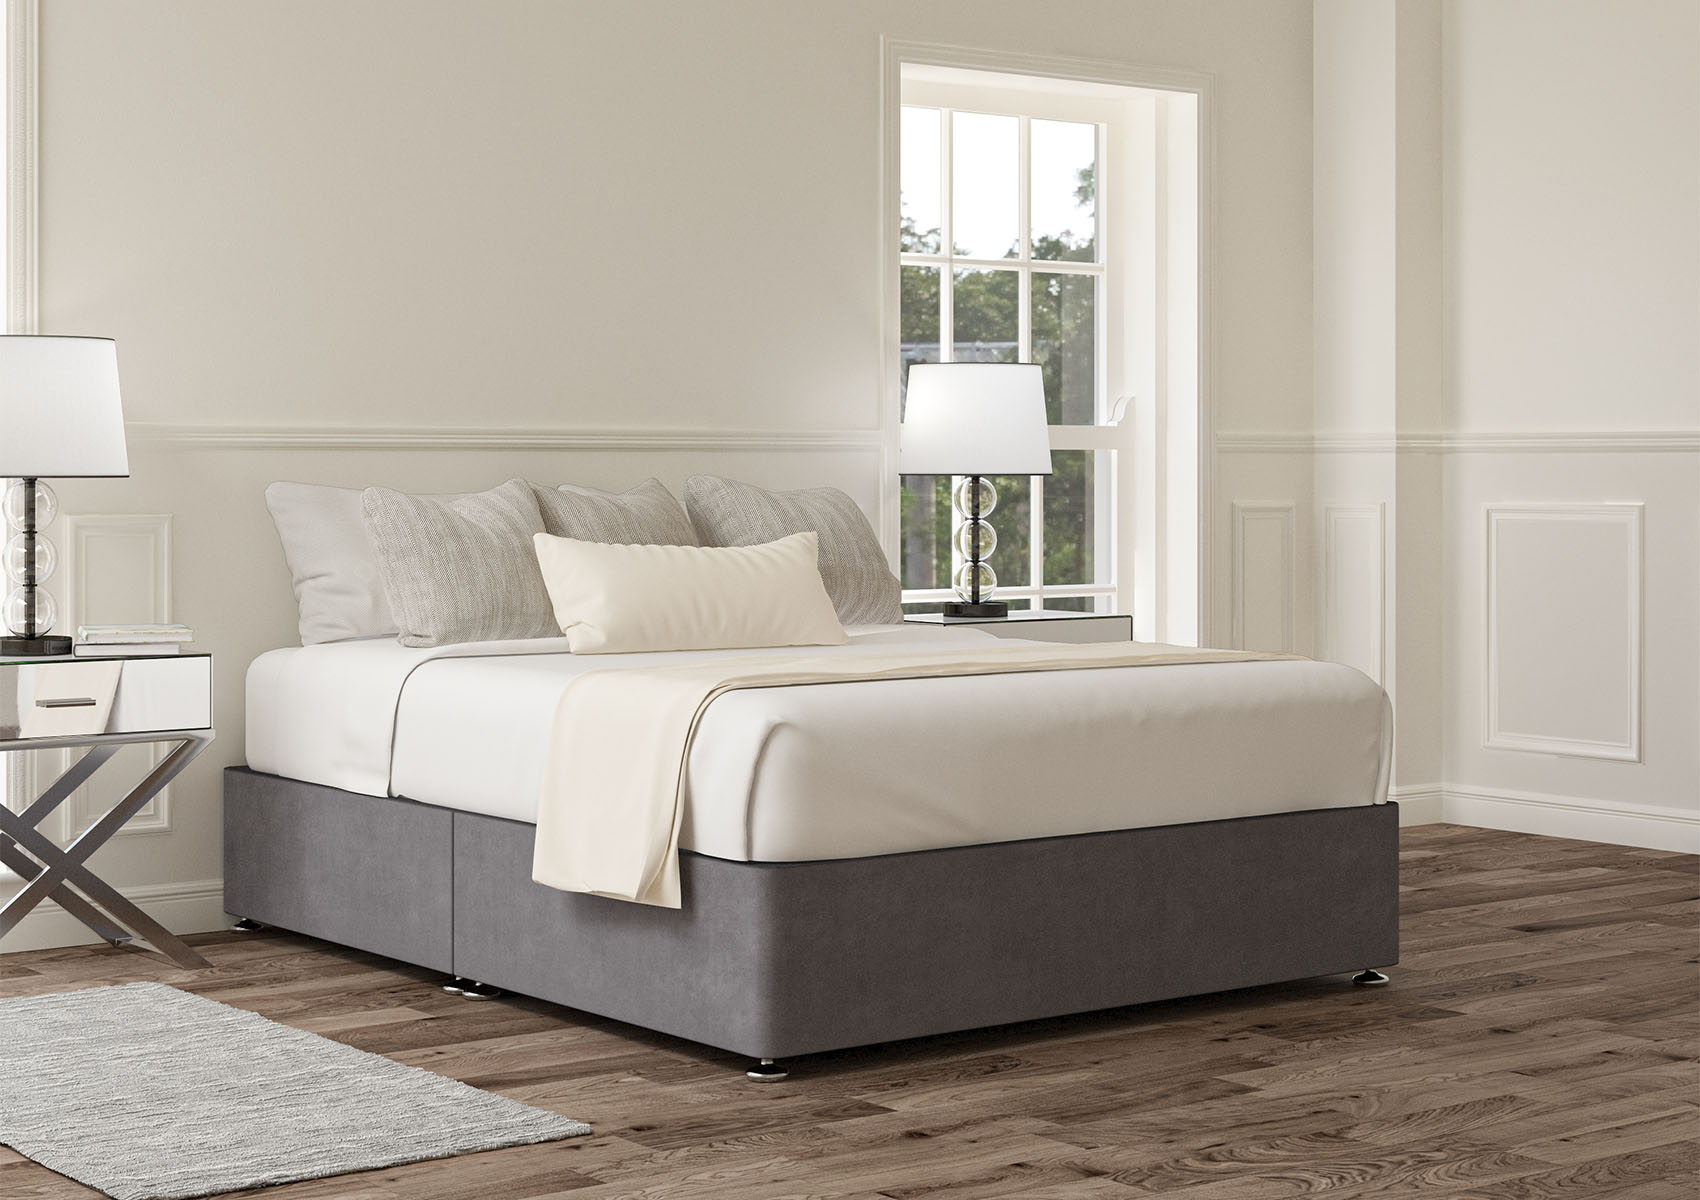 View Upholstered Siera Silver Upholstered Single Divan Bed Time4Sleep information